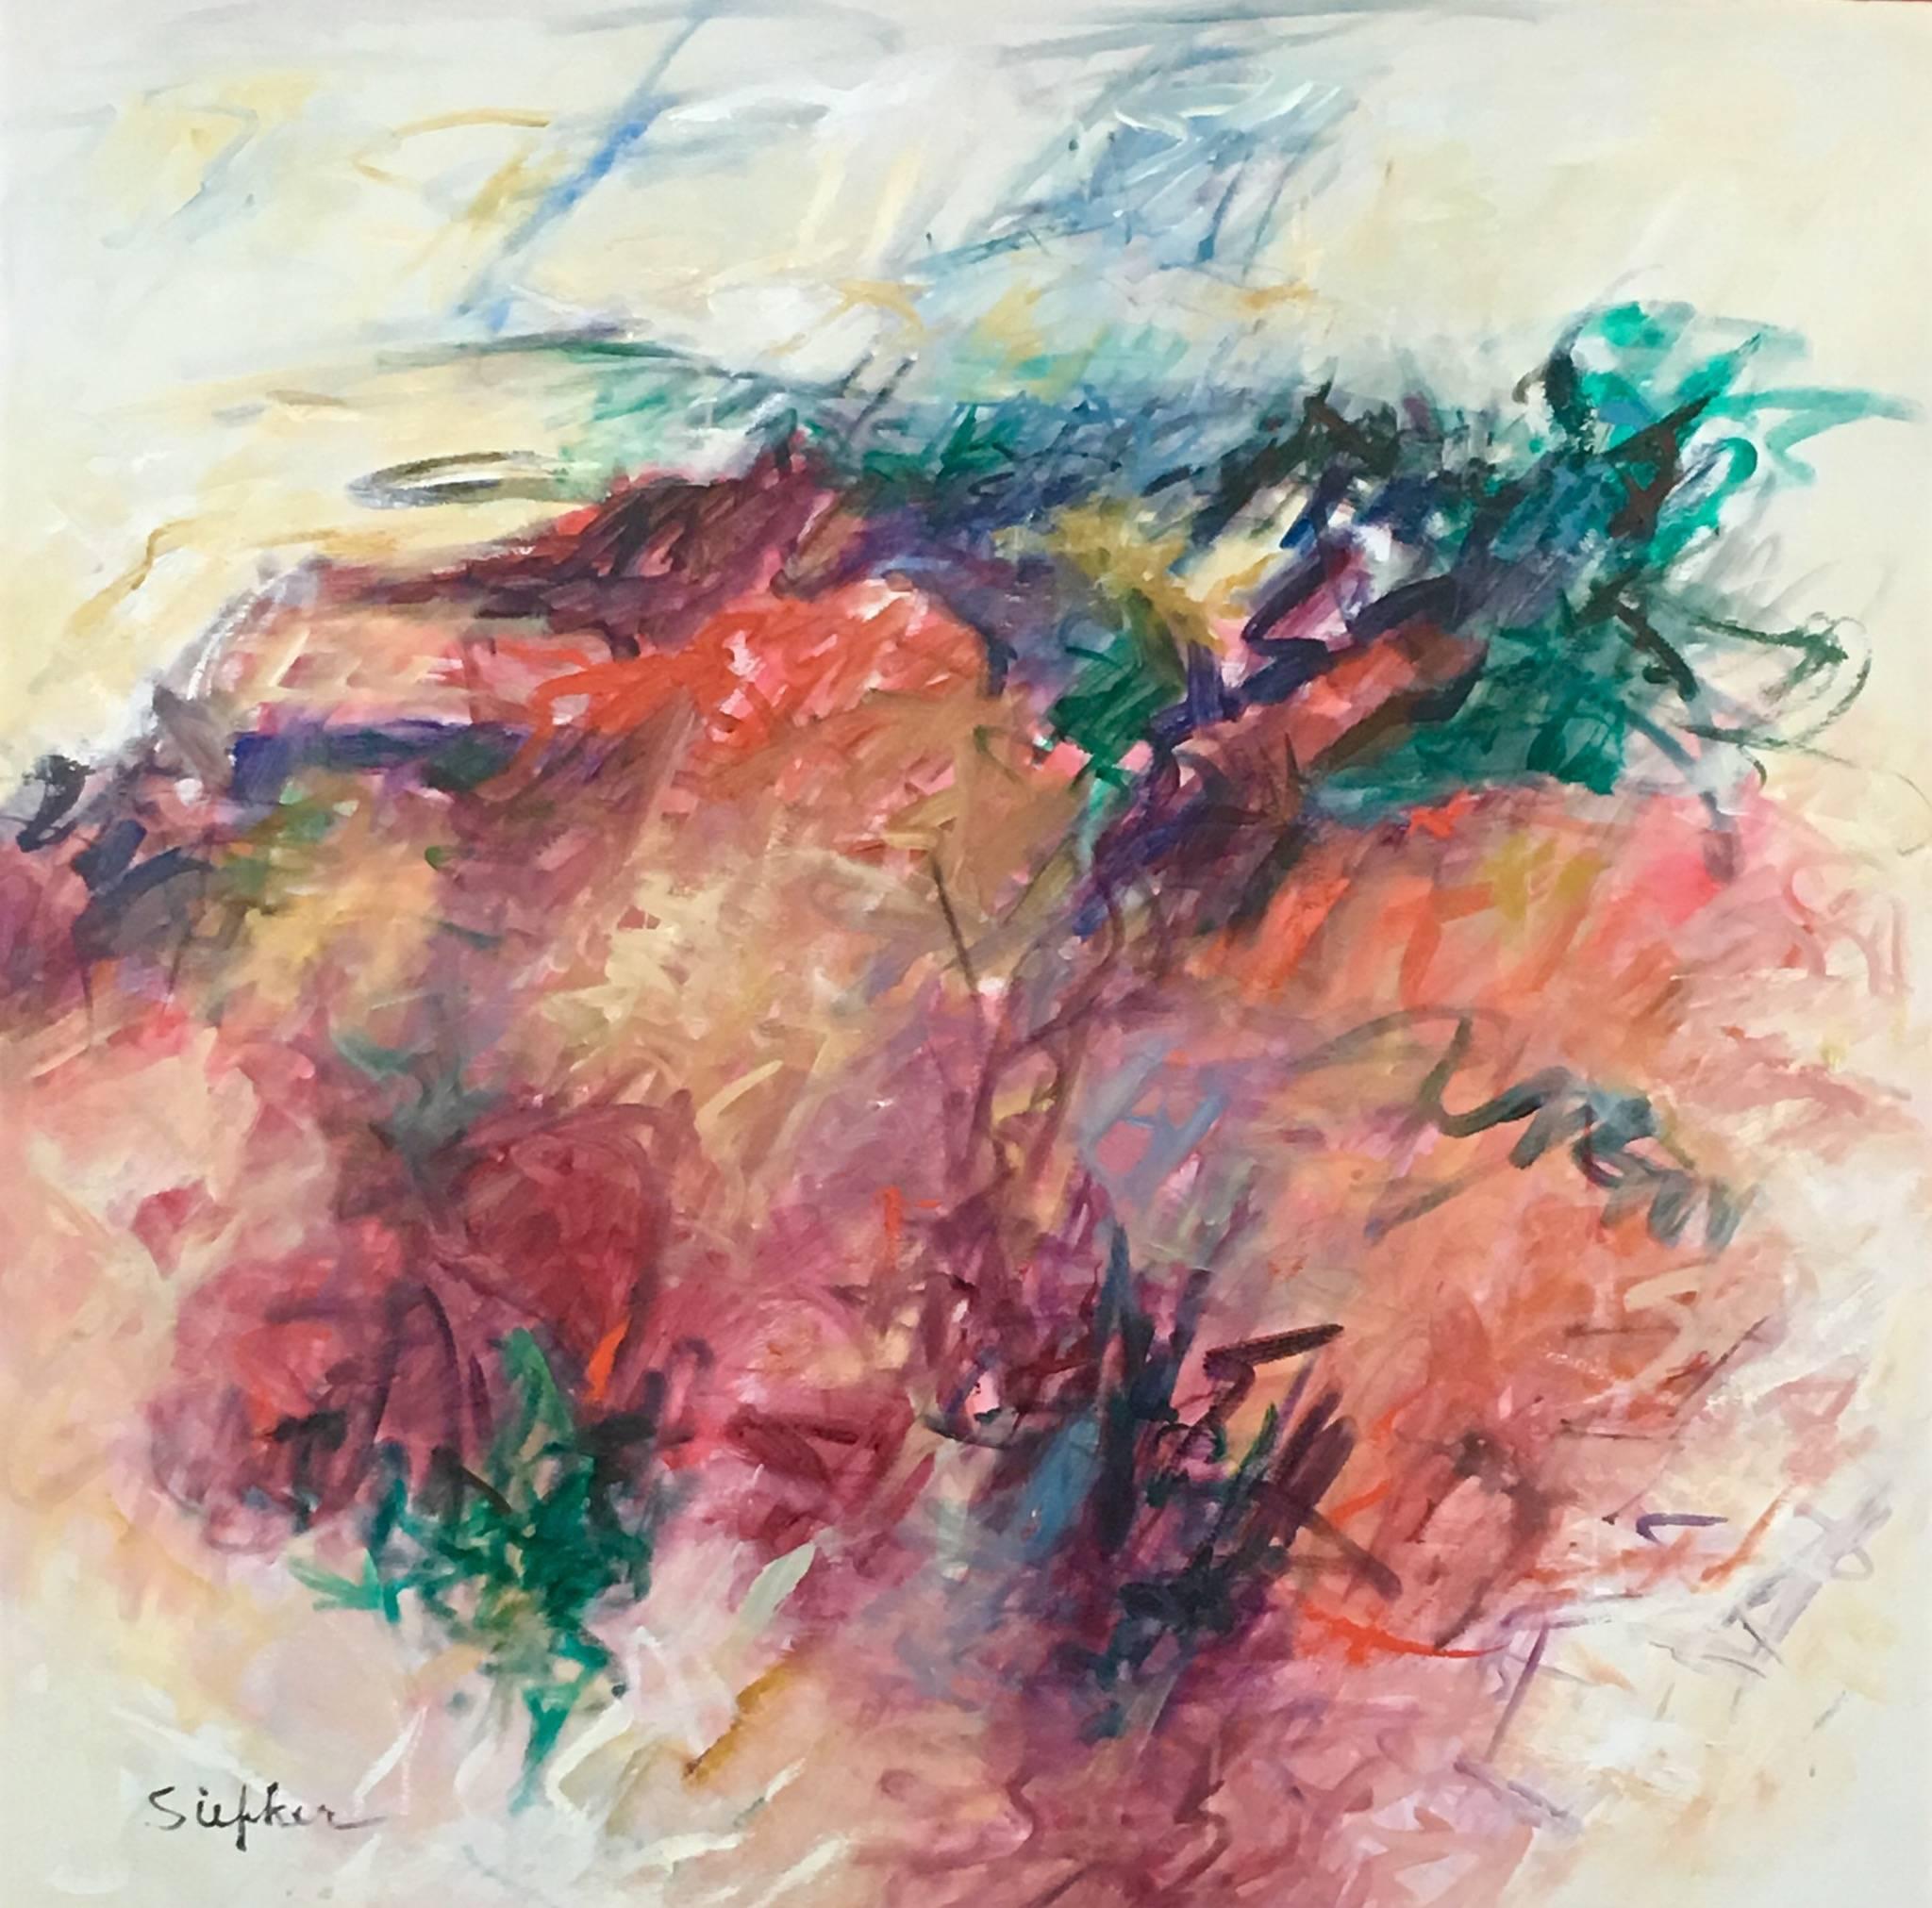 Acrylic on Canvas Titled: “To Jump and Run and Play” - Abstract Expressionist Painting by Mary Lou Siefker